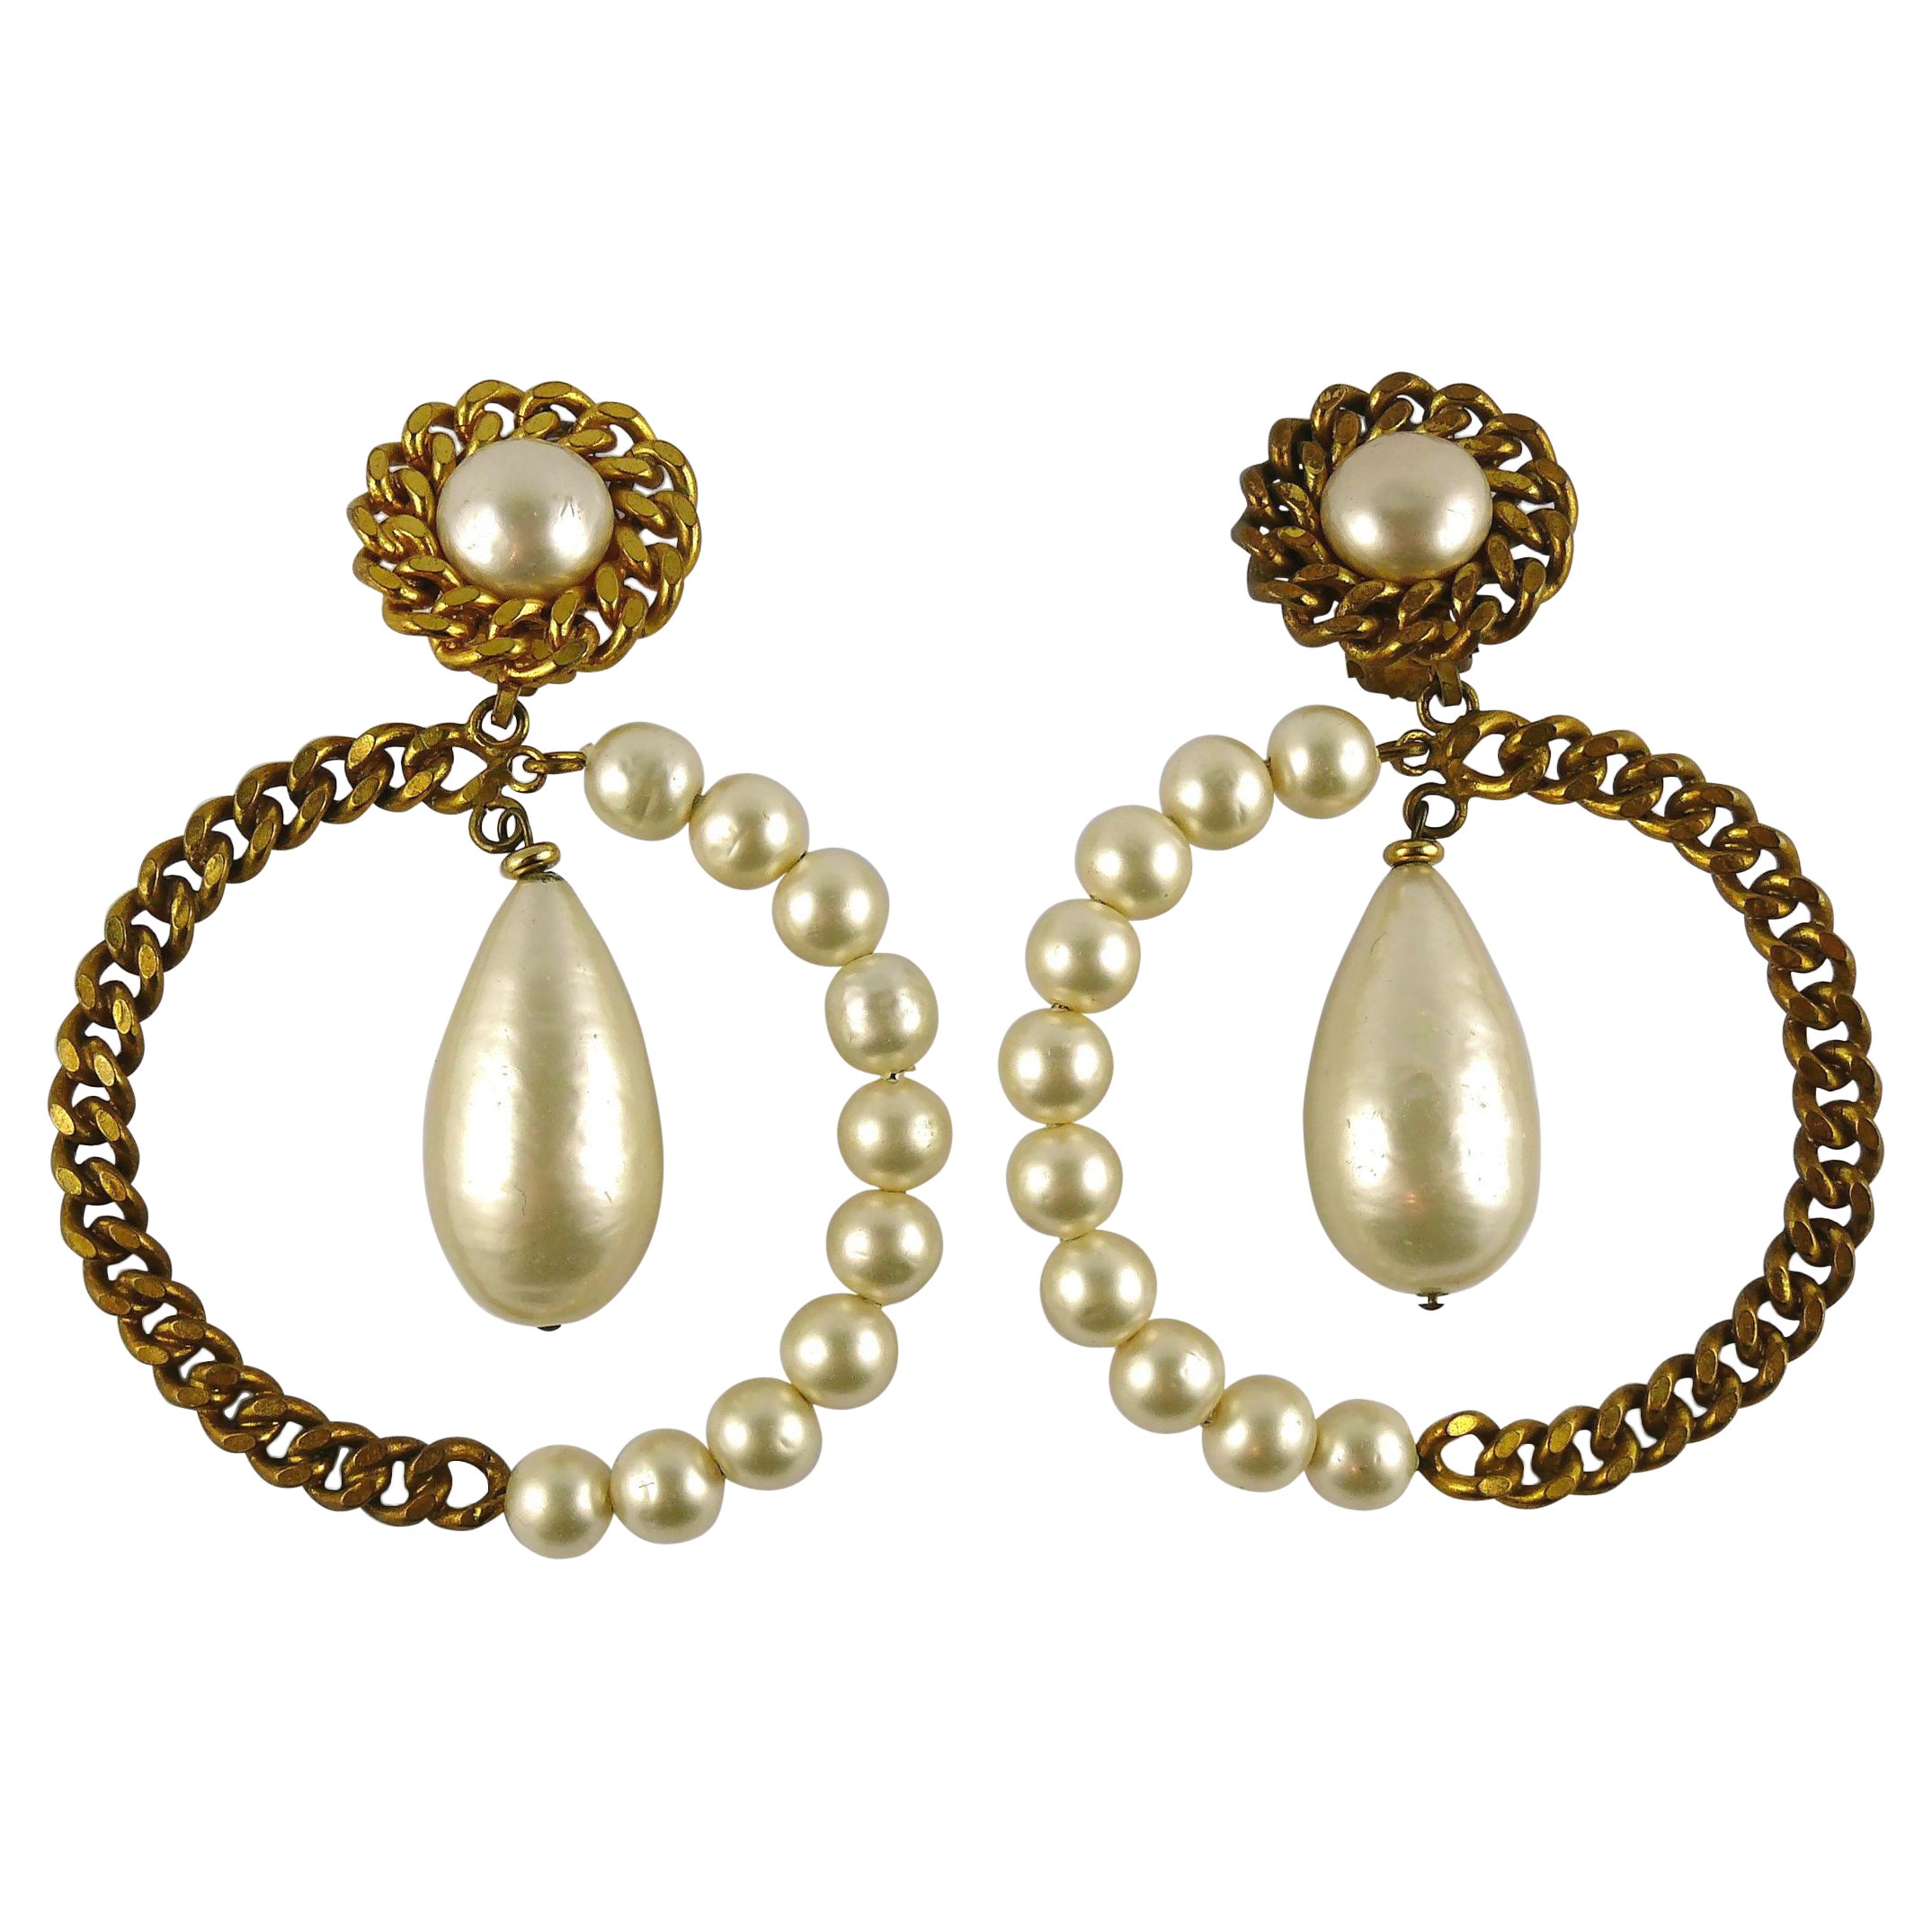 Chanel Vintage Massive Gold Toned Chain and Pearl Hoop Earrings